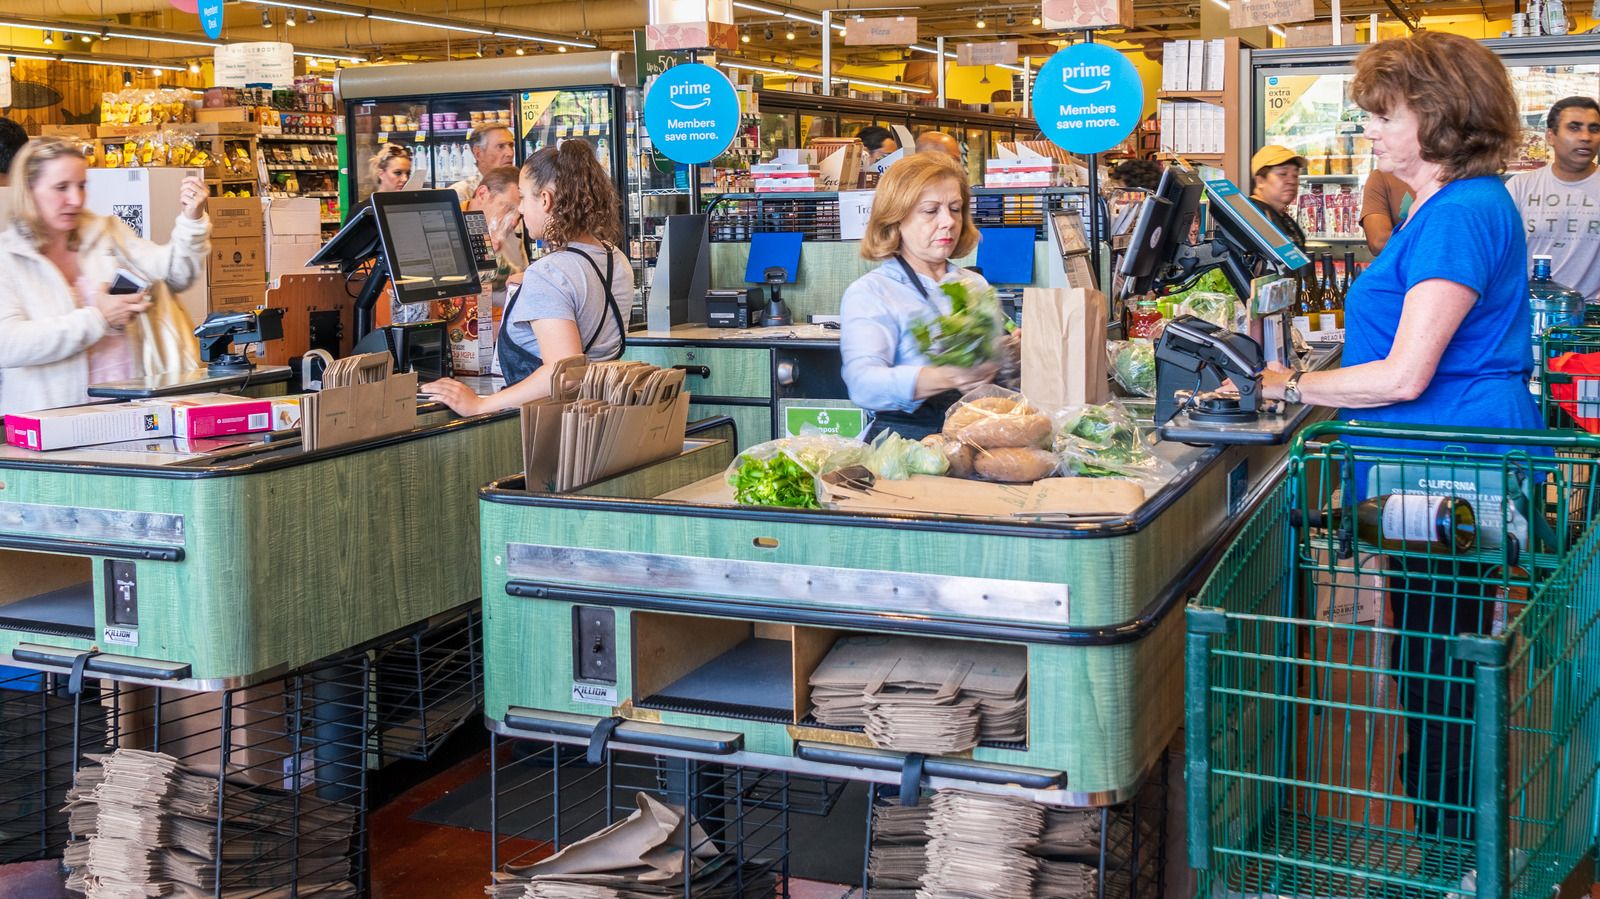 The Whole Foods Snacks Customers Can't Wait To Try